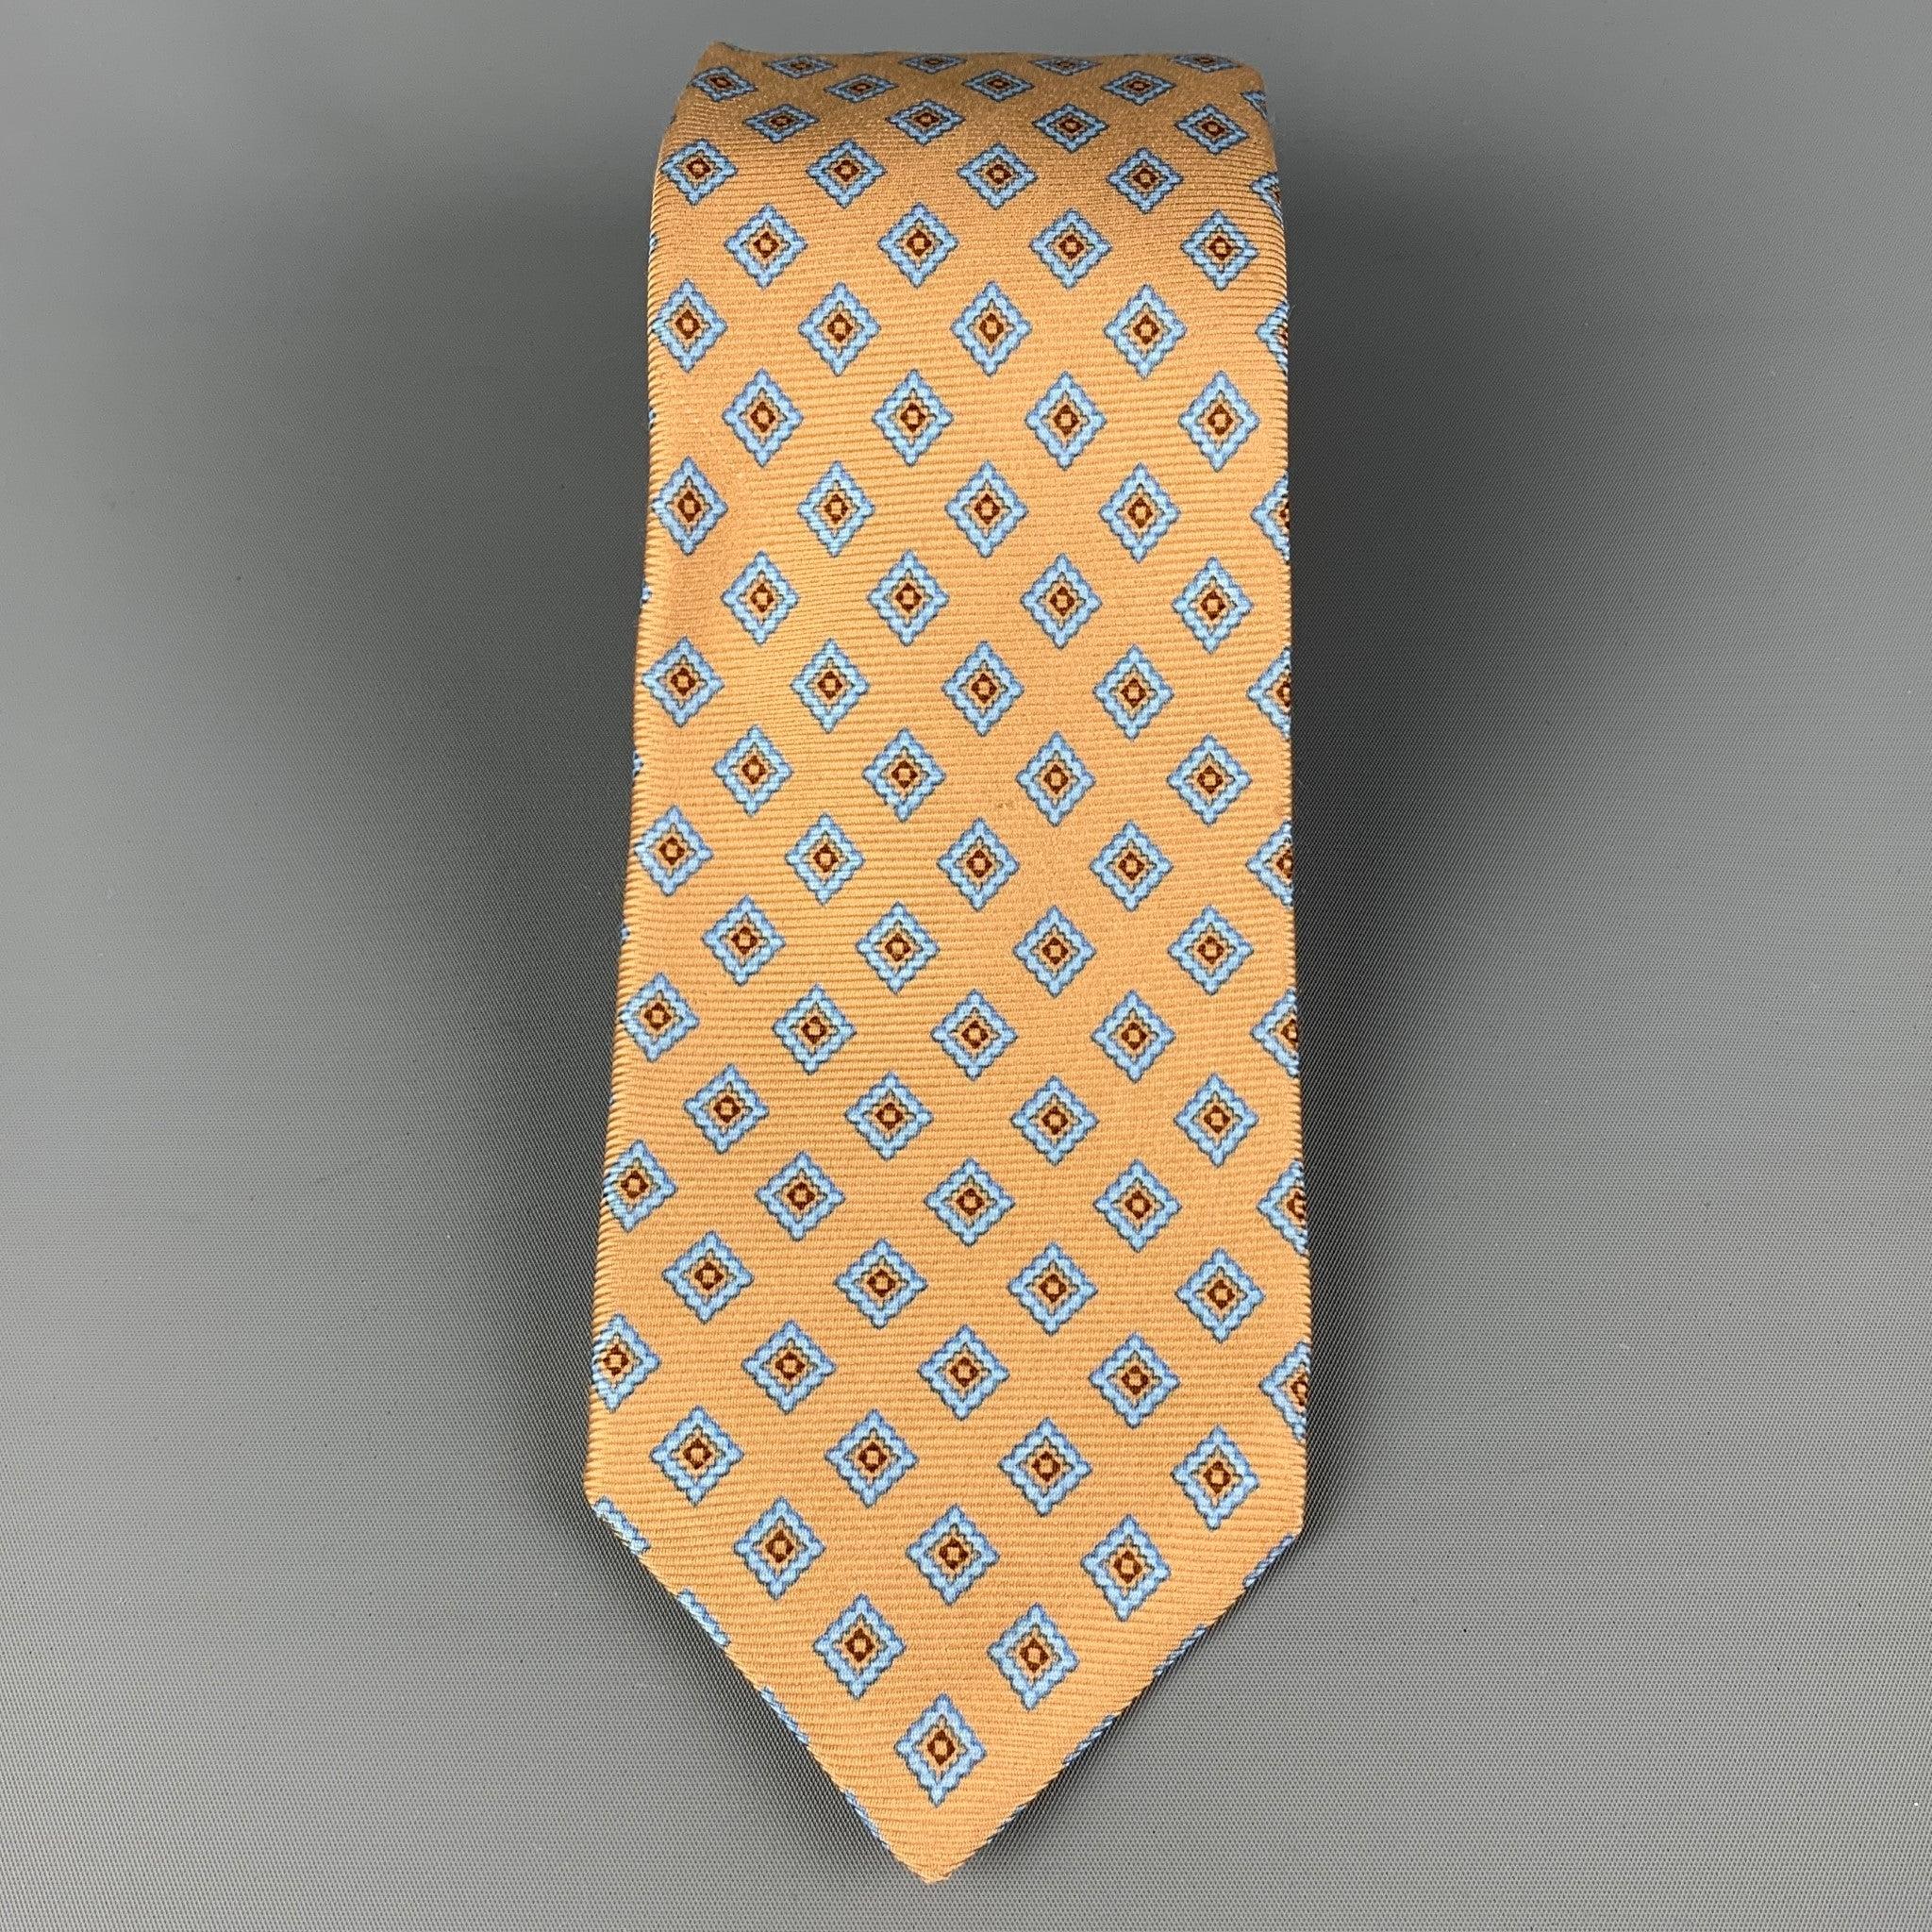 KITON necktie comes in a yellow & blue silk with a all over rhombus print. Made in Italy . Very Good Pre-Owned Condition.Width: 3.75 inches  Length: 62 inches 


  
  
 
Reference: 120381
Category: Tie
More Details
    
Brand:  KITON
Gender: 